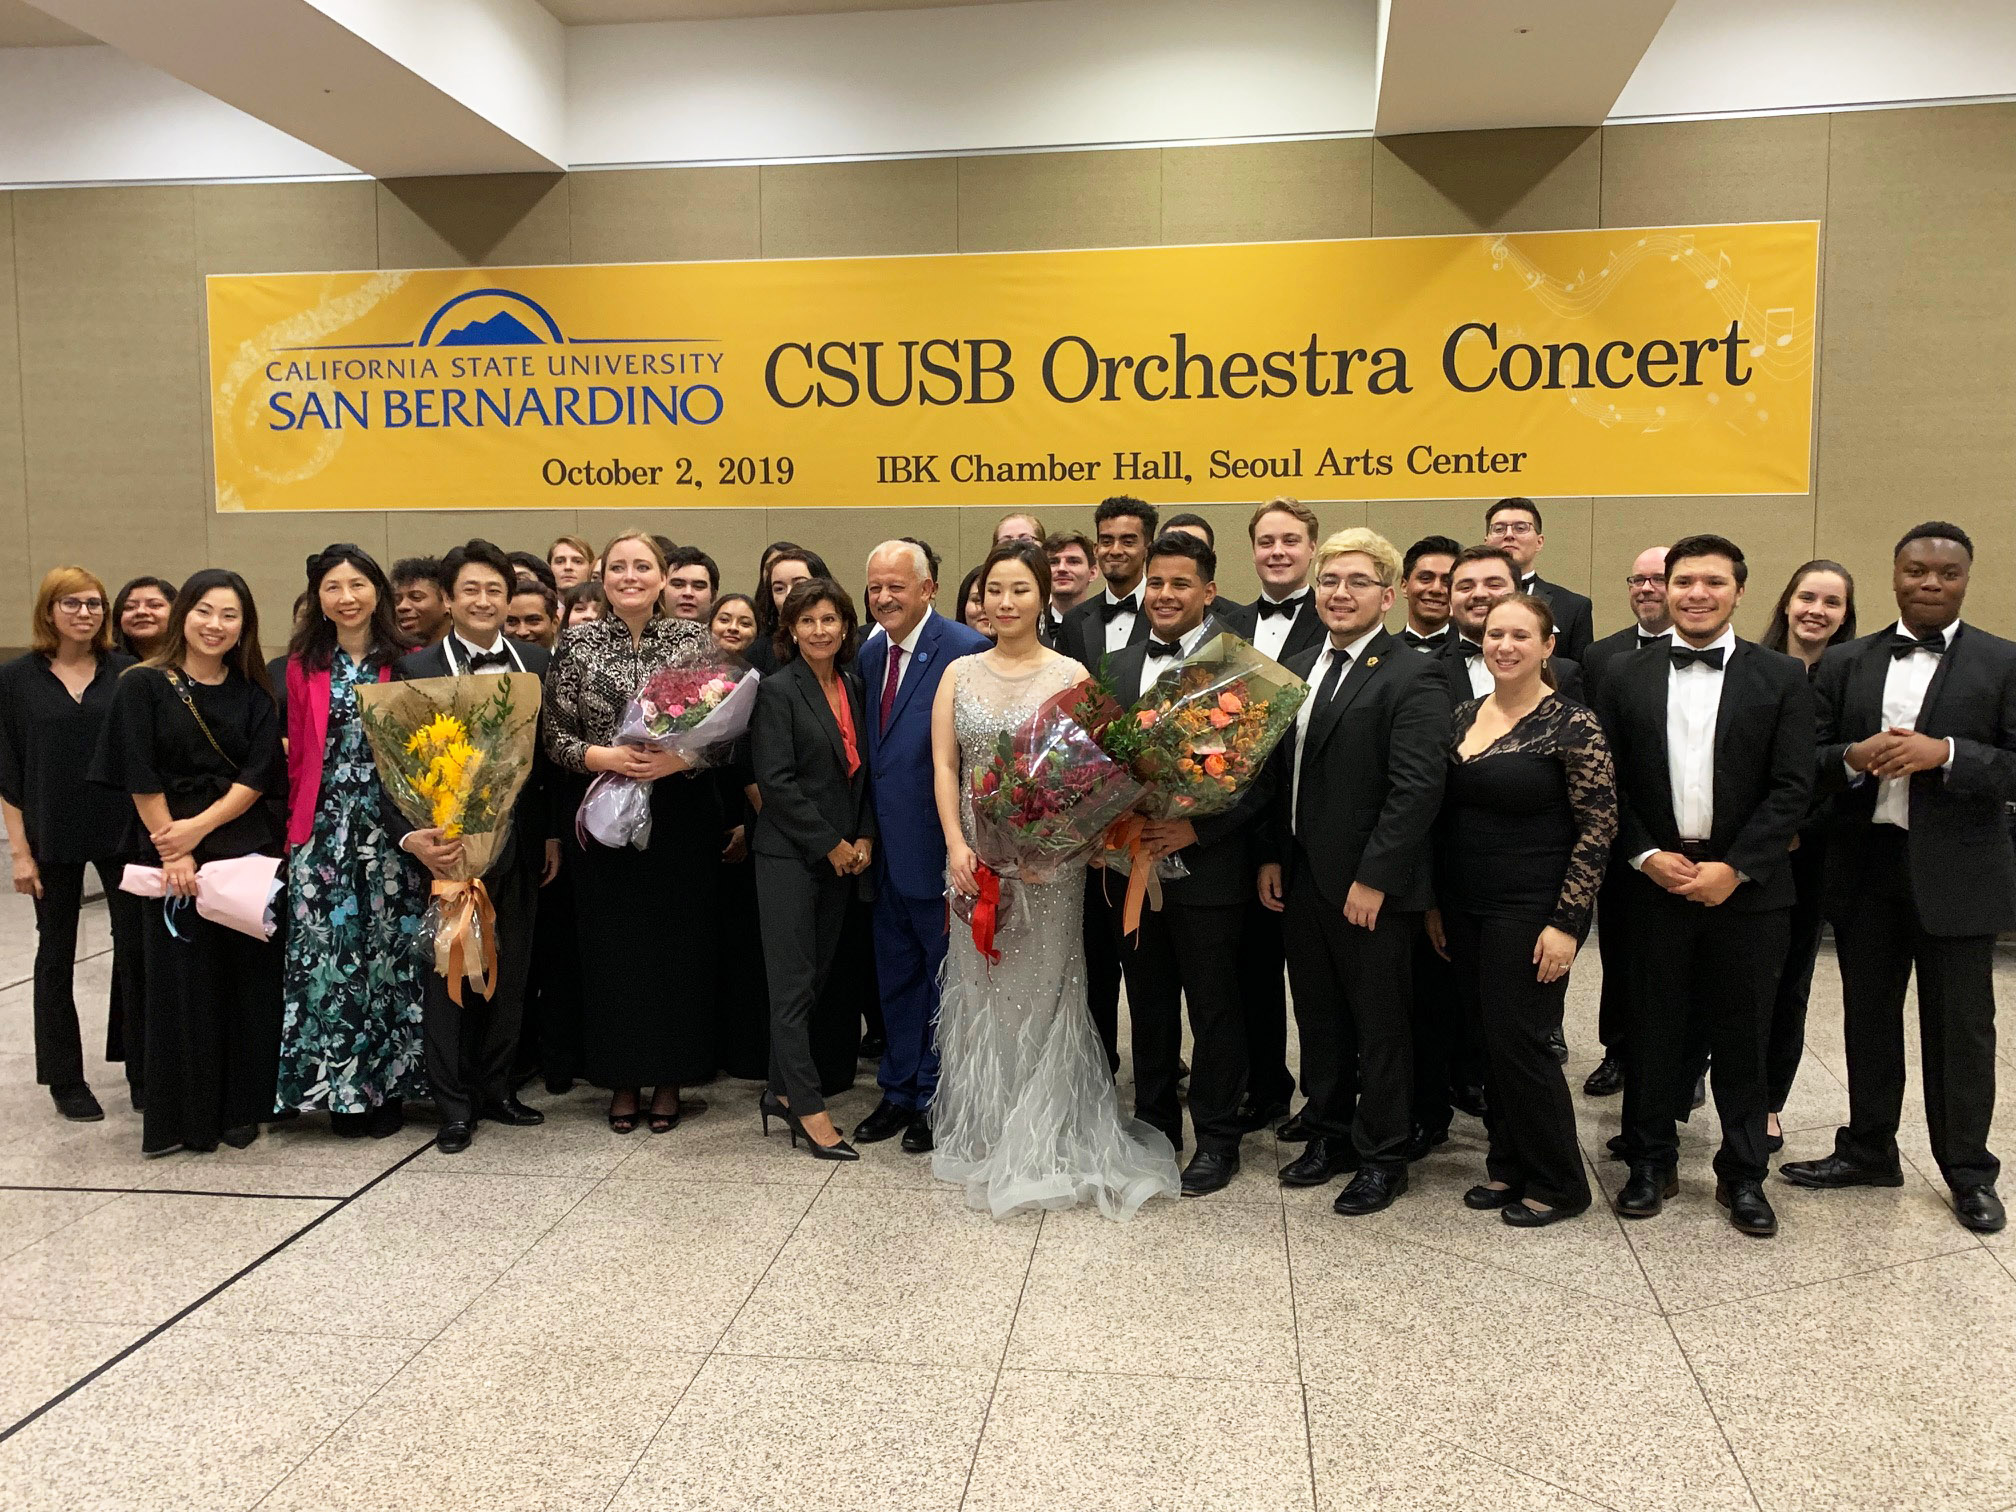 The CSUSB Orchestra Concert was made possible through an endowment and a grant worth $498,000 created by the Korea Foundation